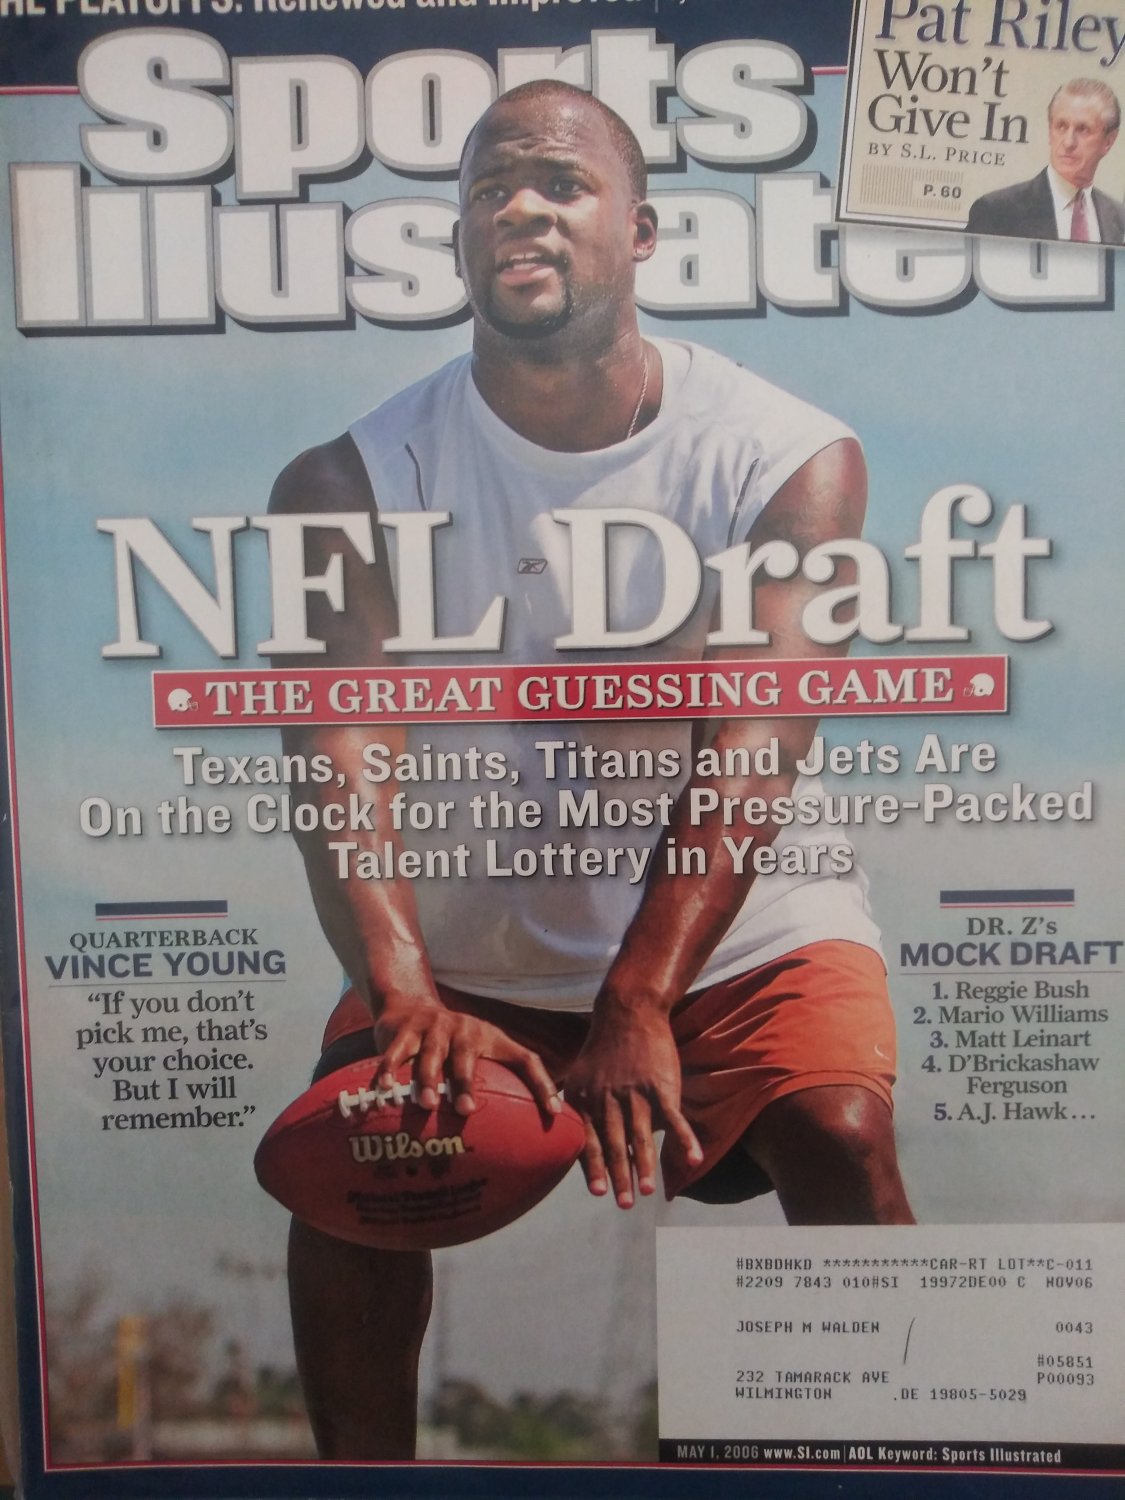 MAY 1, 2006 SPORTS ILLUSTRATED MAGAZINE FEATURING VINCE YOUNG